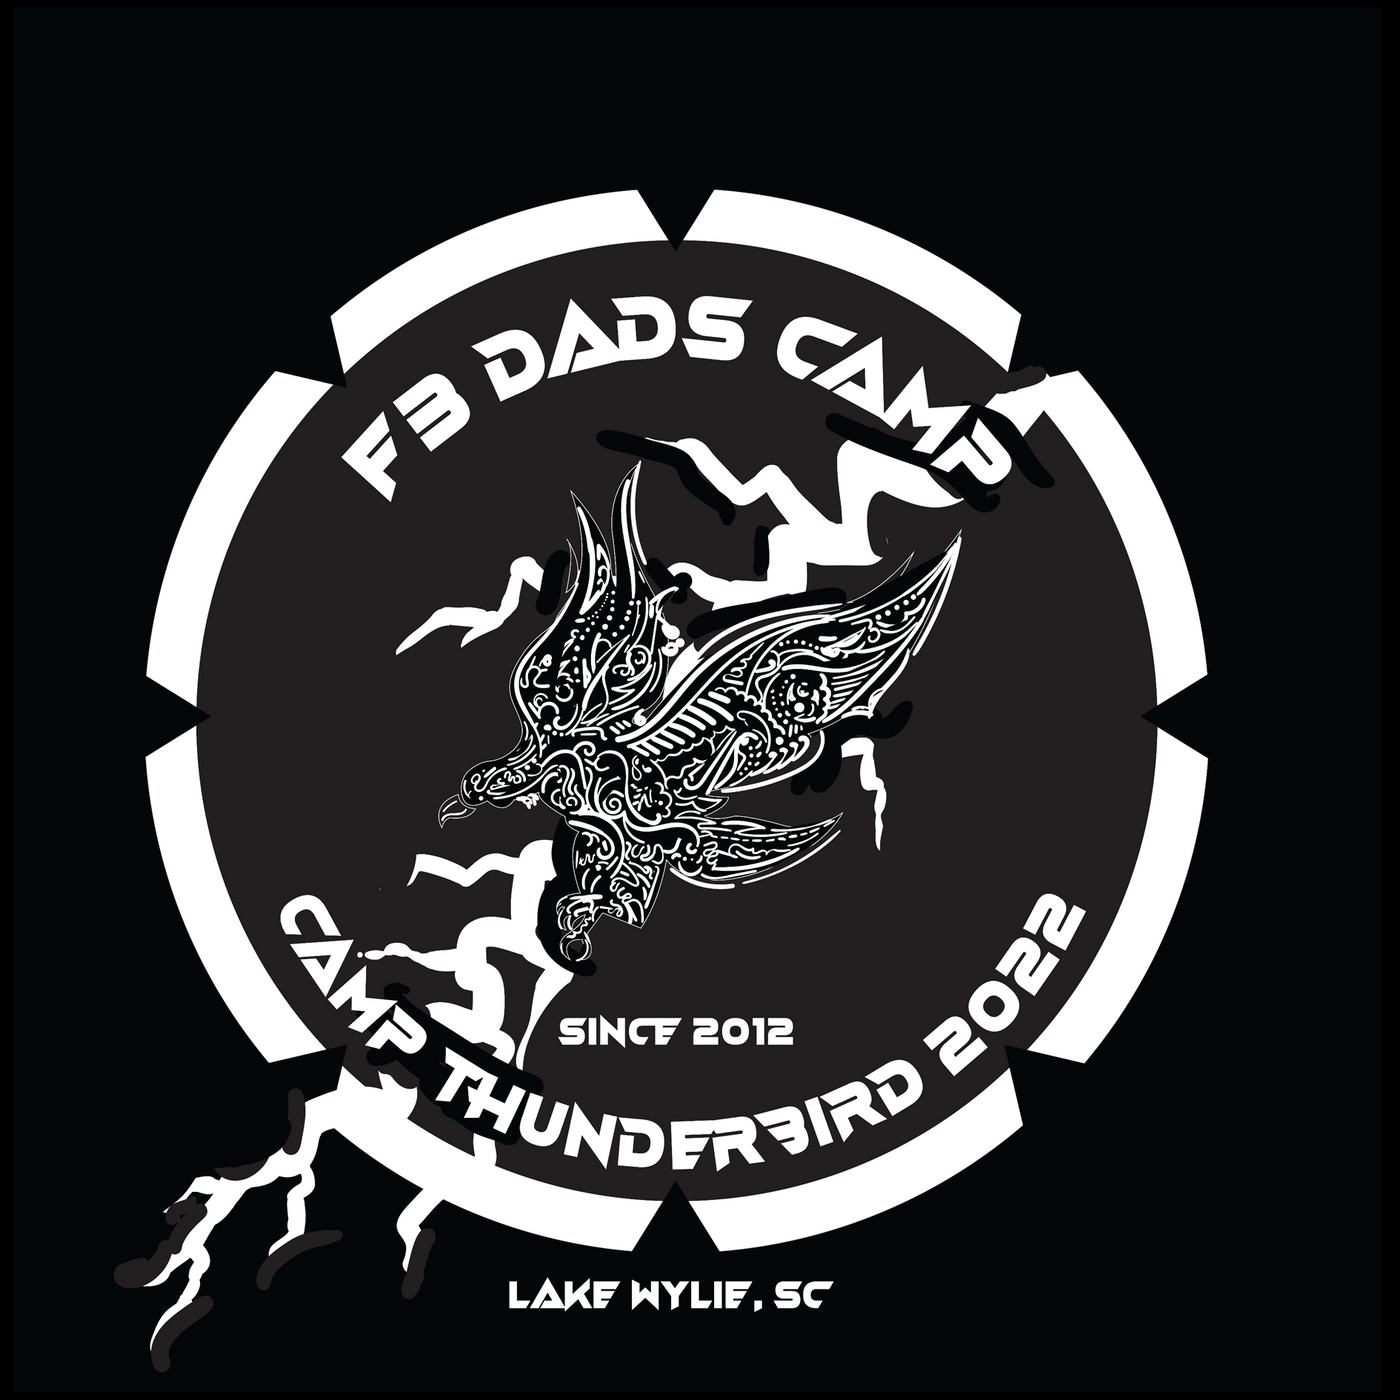 F3 Dads Camp, Camp Thunderbird 2022 Pre-Order August 2022